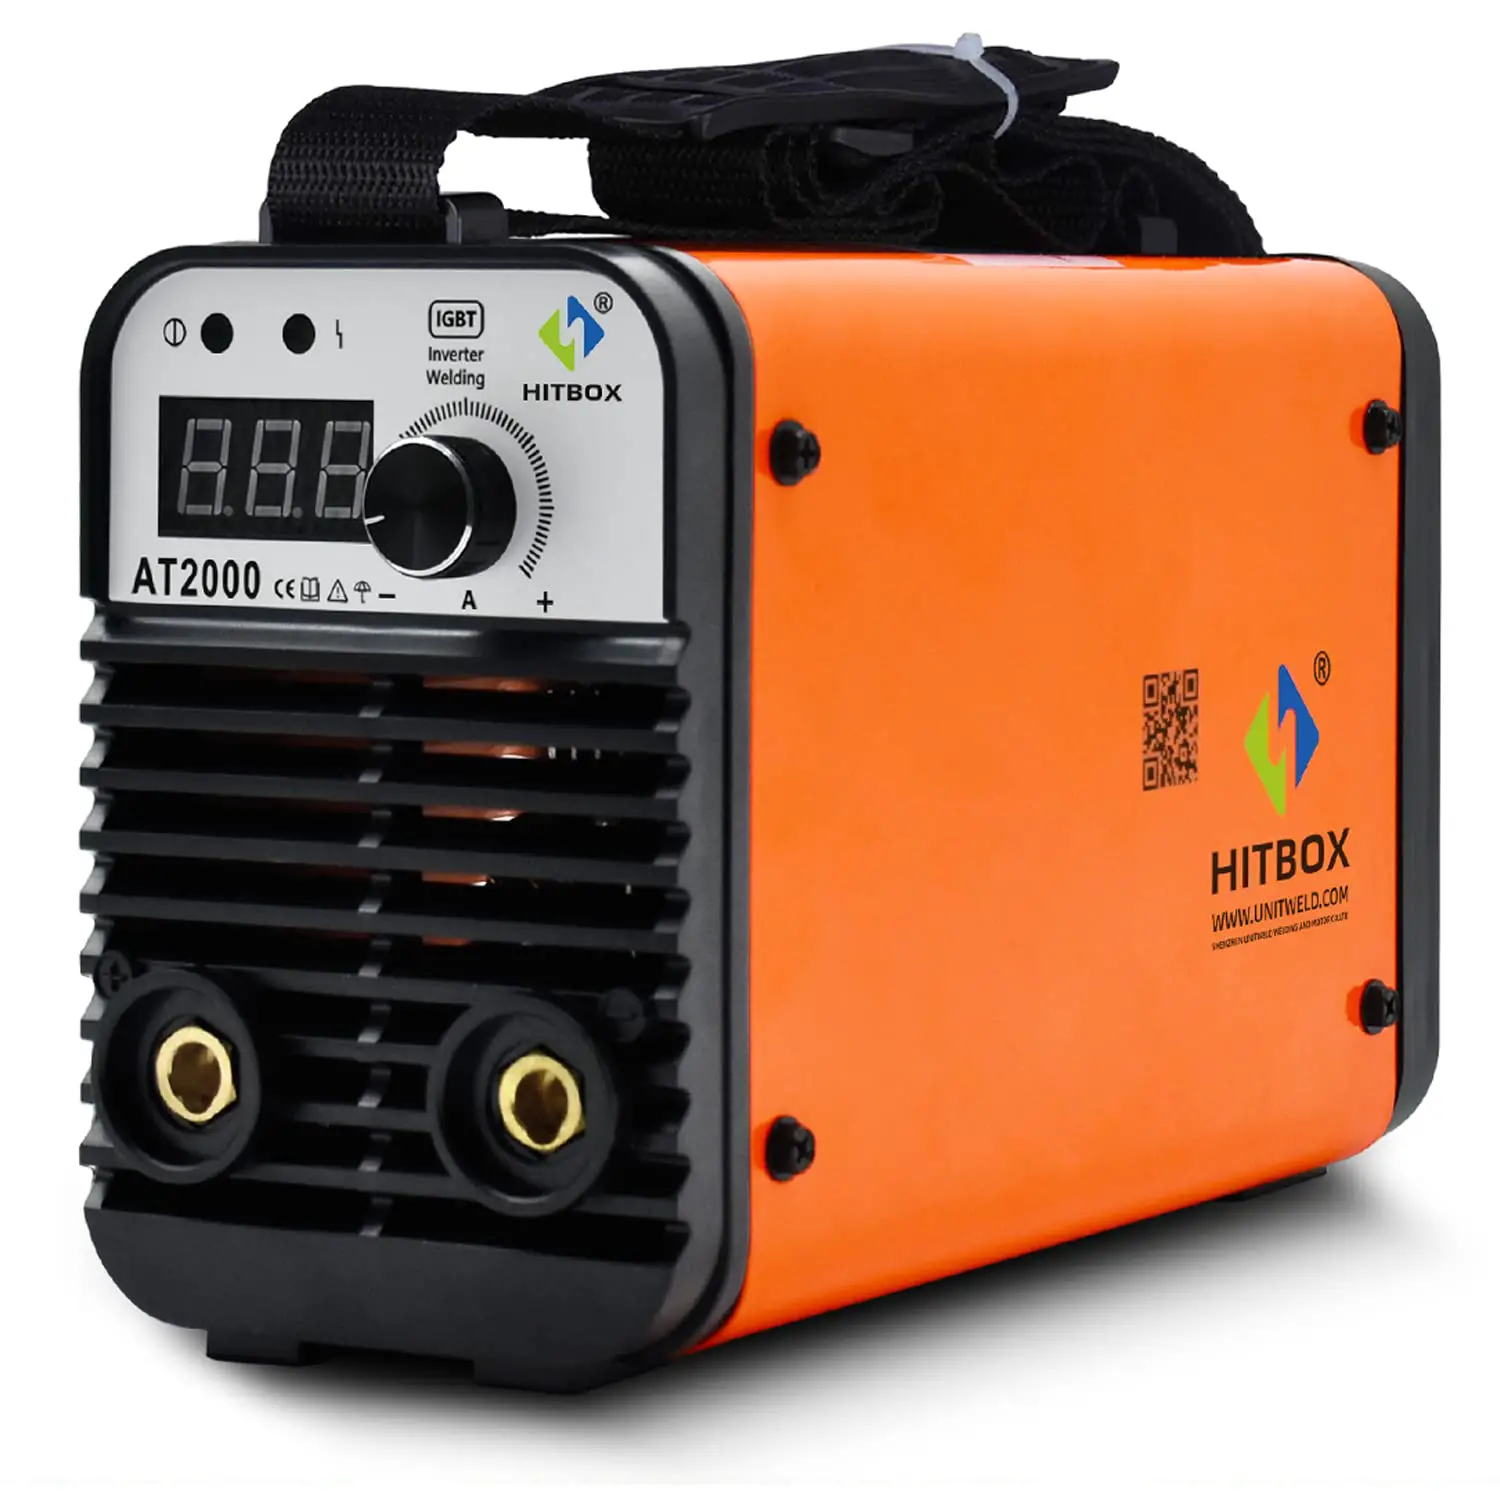 Hitbox 200A Arc MMA Welding Machine Review